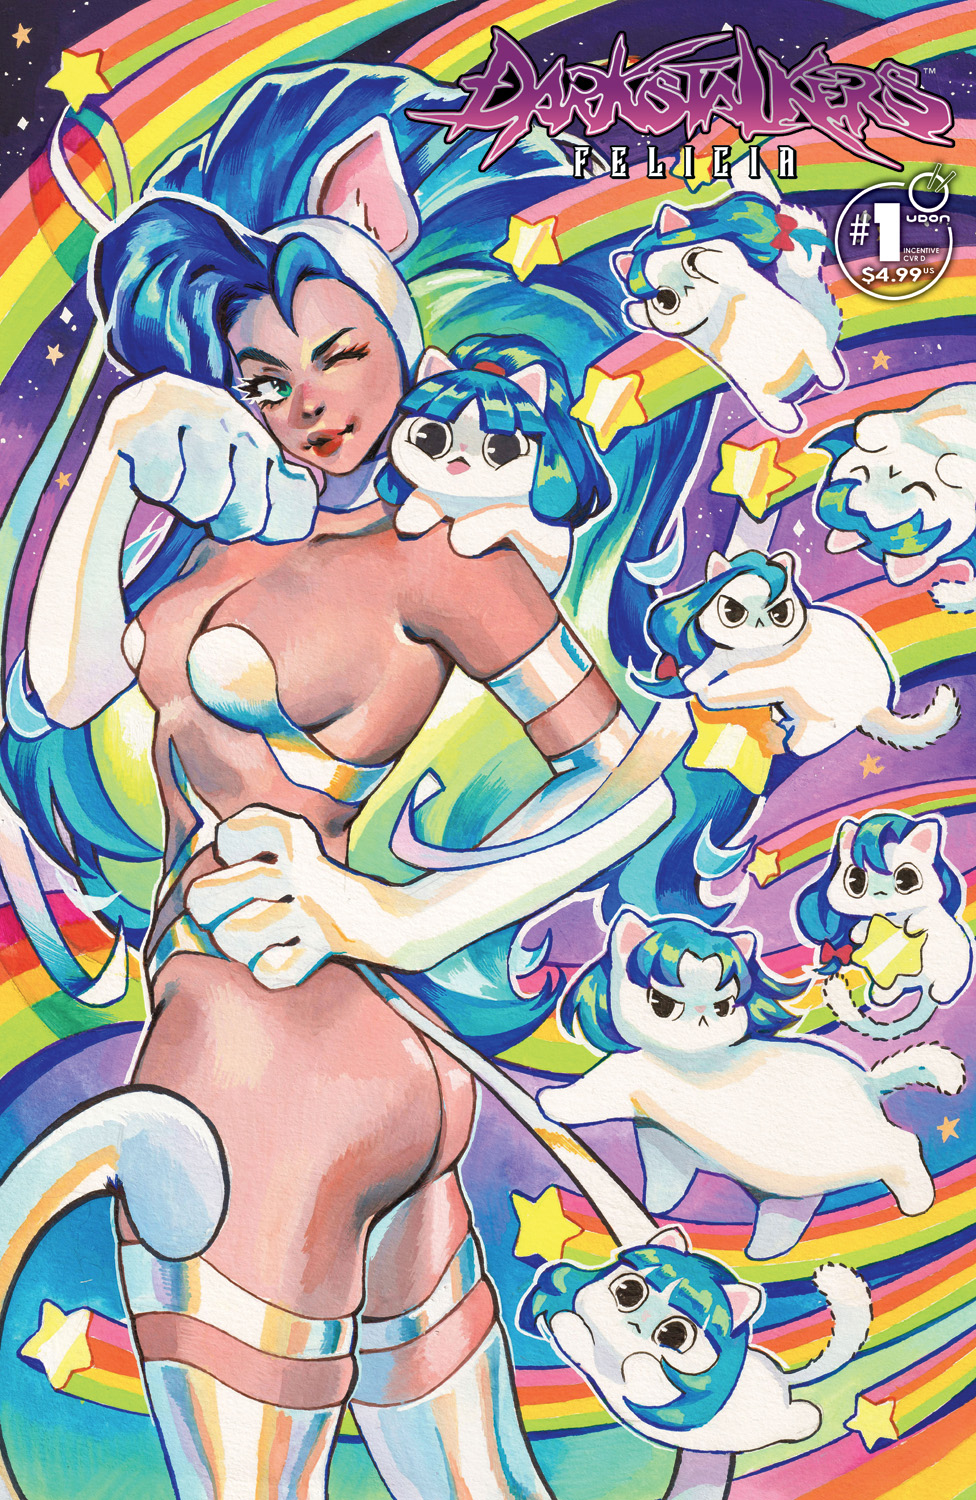 Darkstalkers Felicia #1 Cover D 1 for 5 Incentive Gonzales